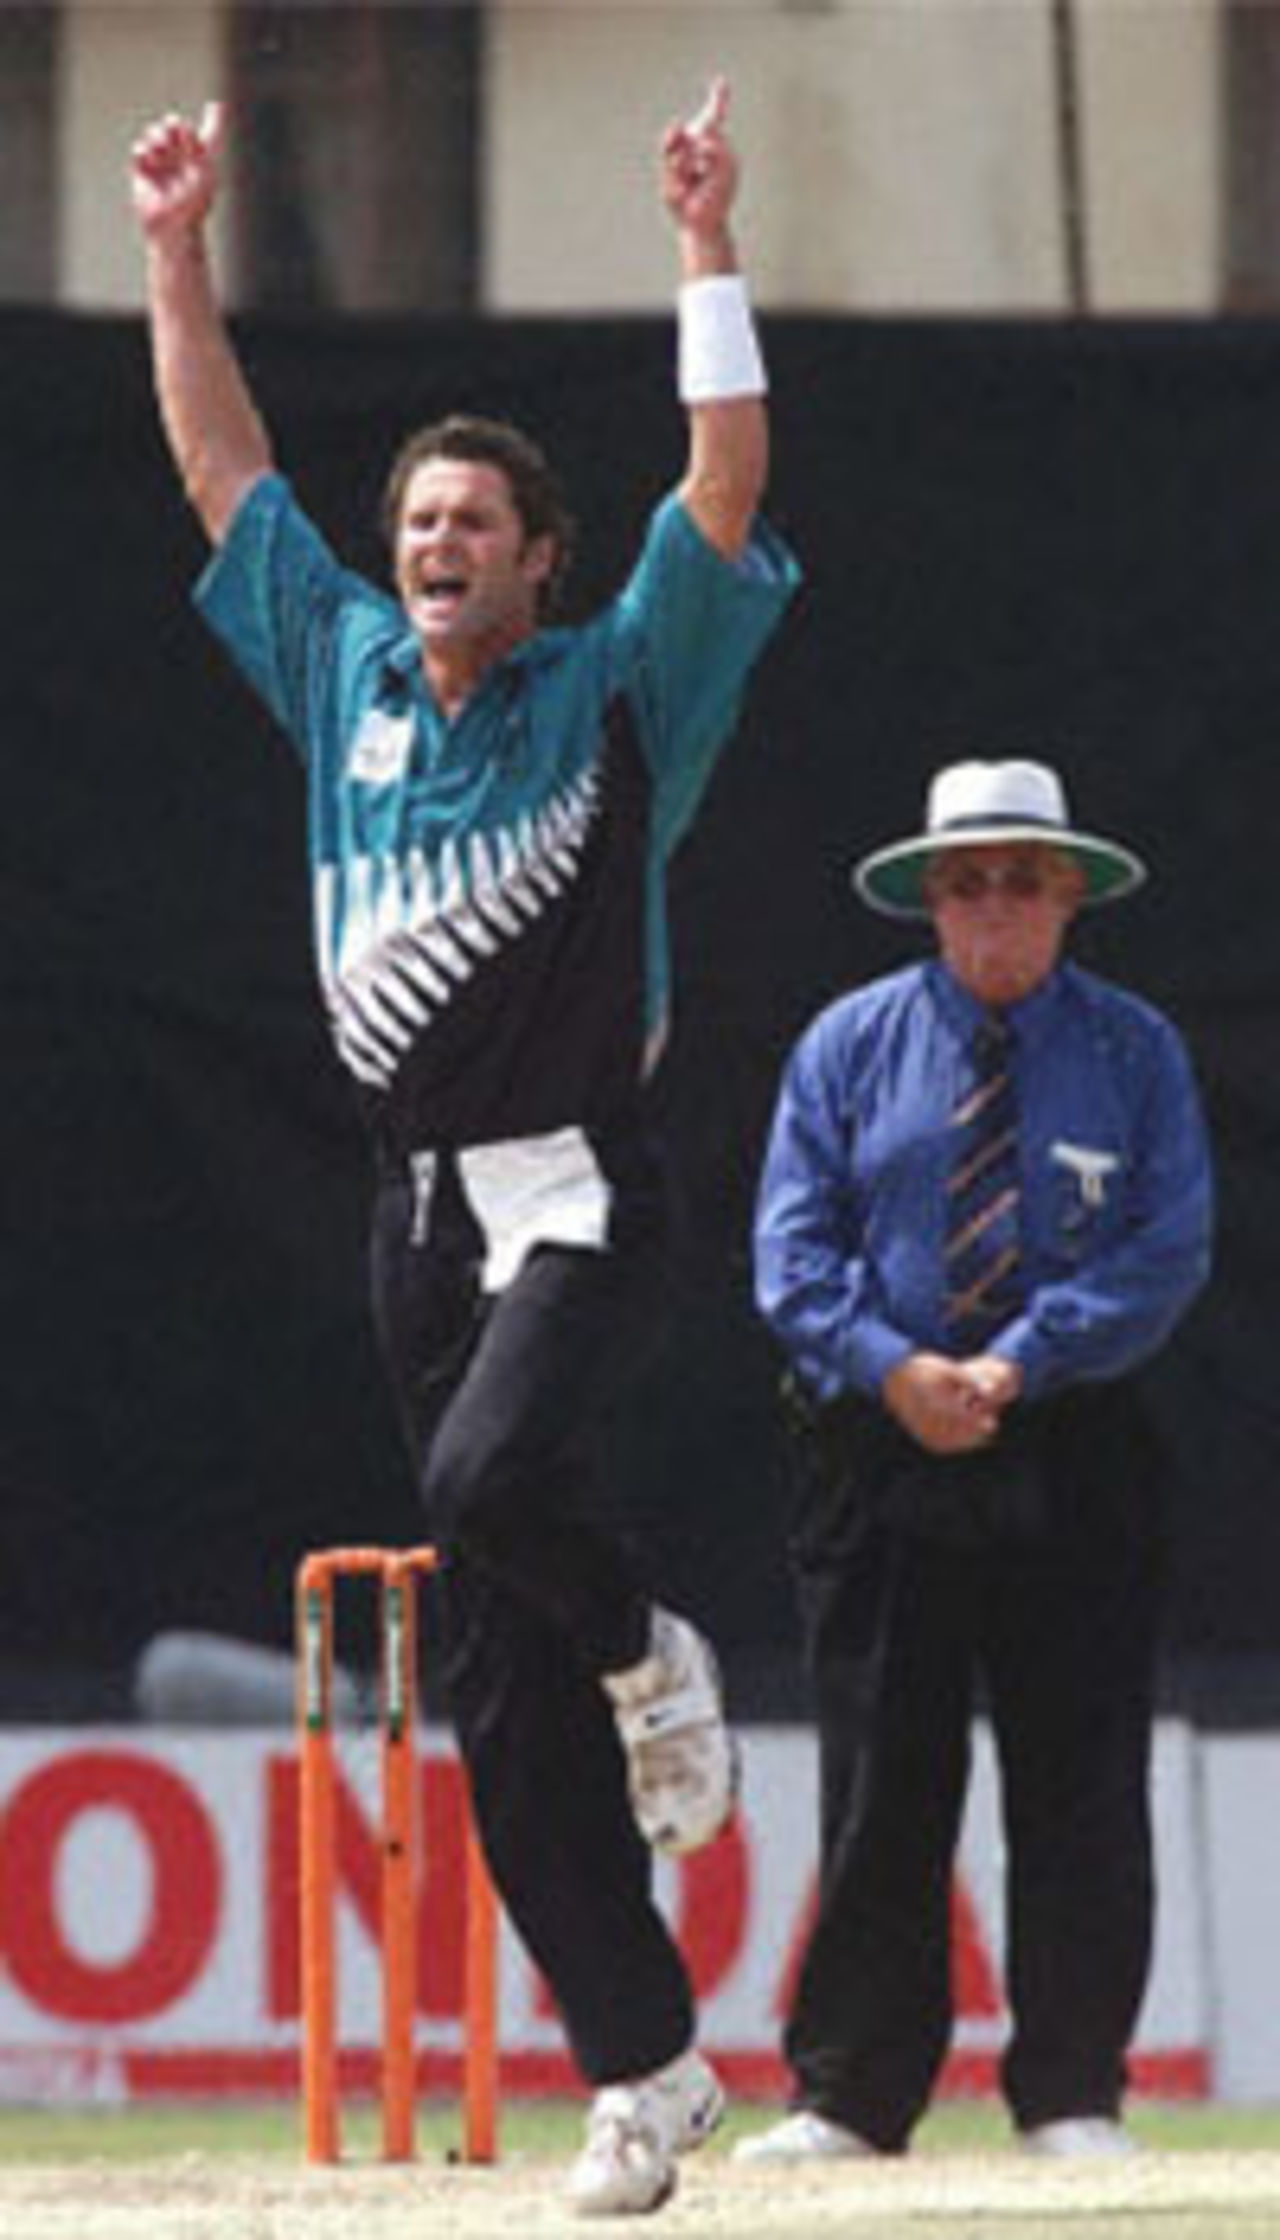 Chris Cairns appeals as Umpire Shepherd is unmoved, ICC KnockOut, 2000/01, Final, India v New Zealand, Gymkhana Club Ground, Nairobi, 15 October 2000.